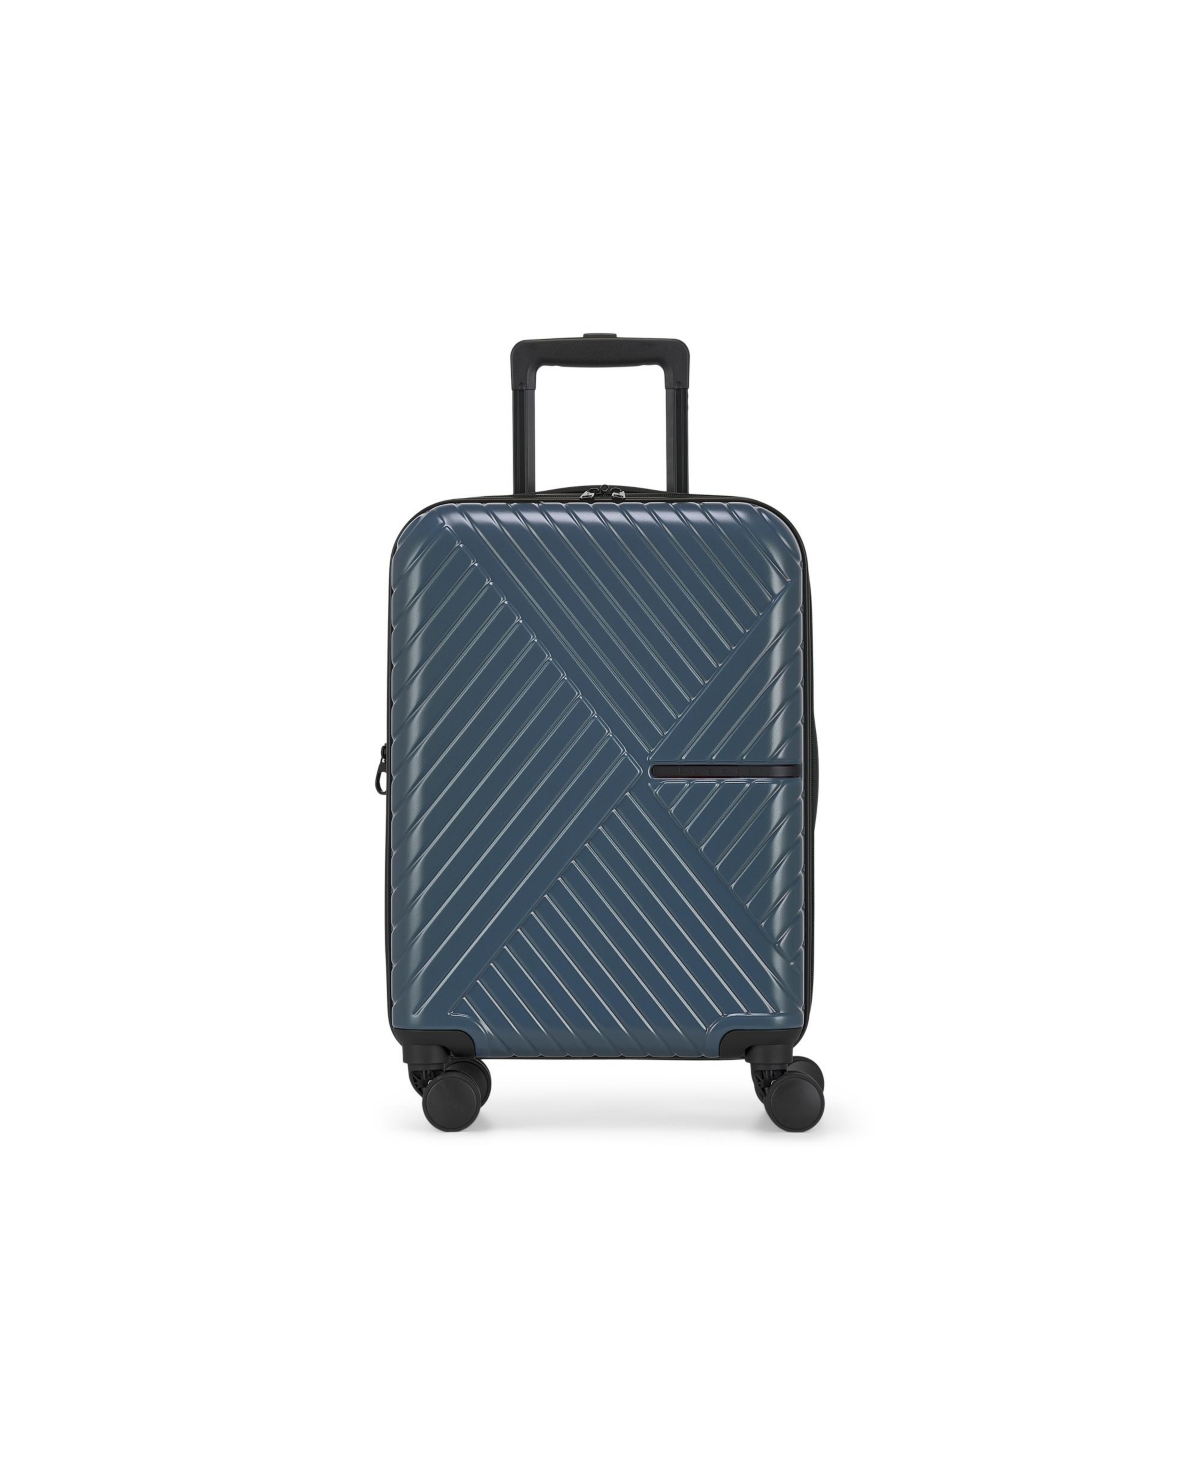 Berlin Carry-On Abs Luggage - Mink